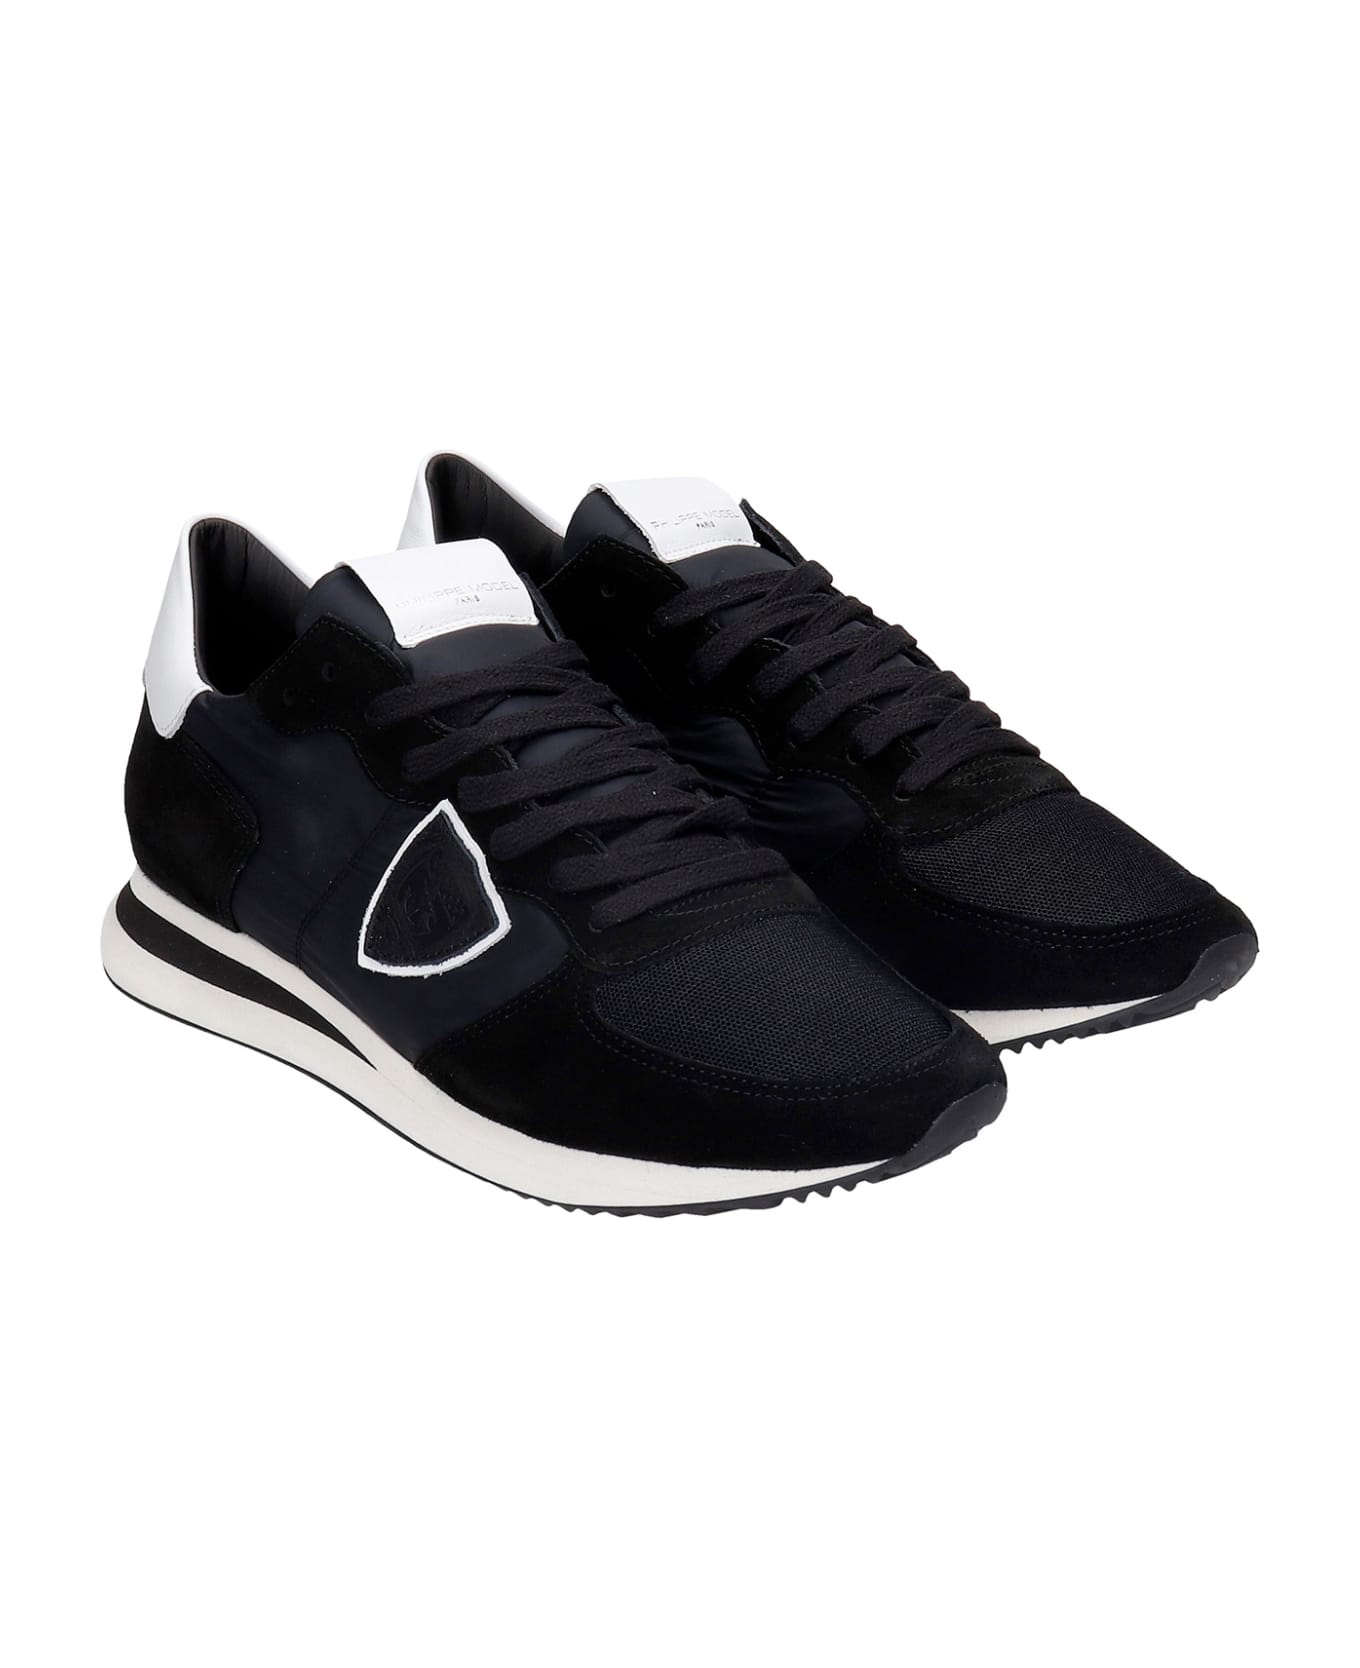 Philippe Model Trpx Sneakers In Black Suede And Fabric - BLACK スニーカー